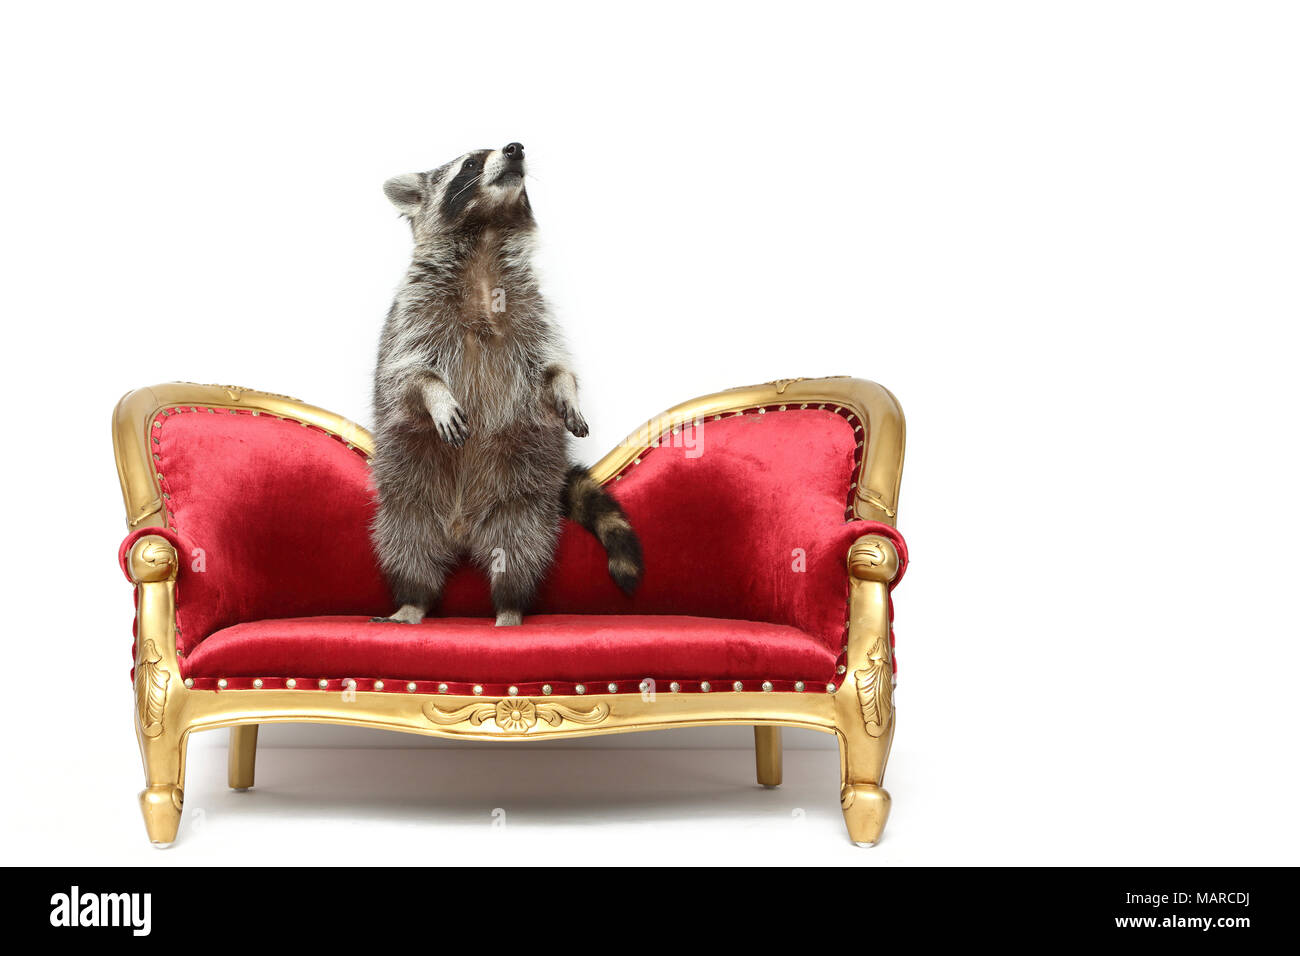 Raccoon (Procyon lotor). Adult standing upright on a baroque couch. Studio picture against a white background. Germany Stock Photo